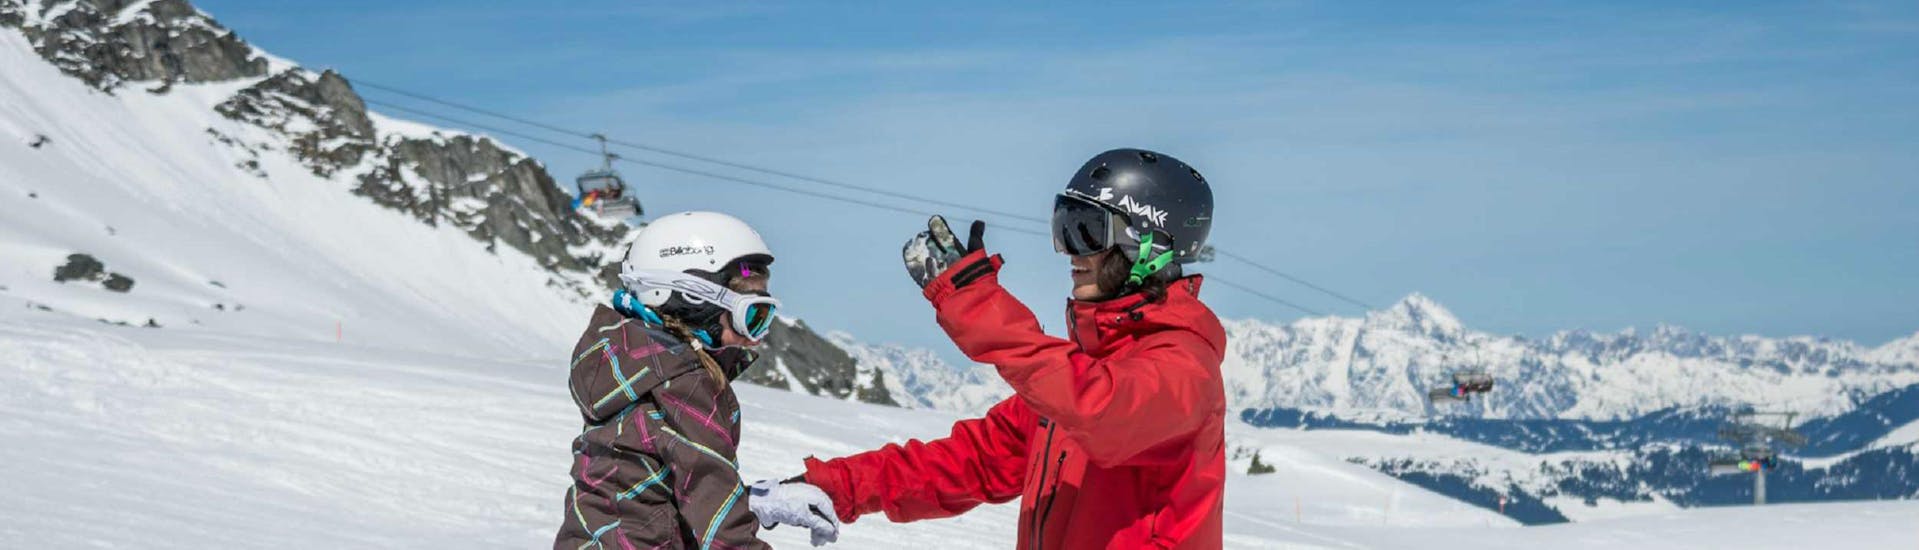 An instructor teaching a pupil during snowboarding lessons "All-in-One" for beginners with Ski Dome Viehhofen.